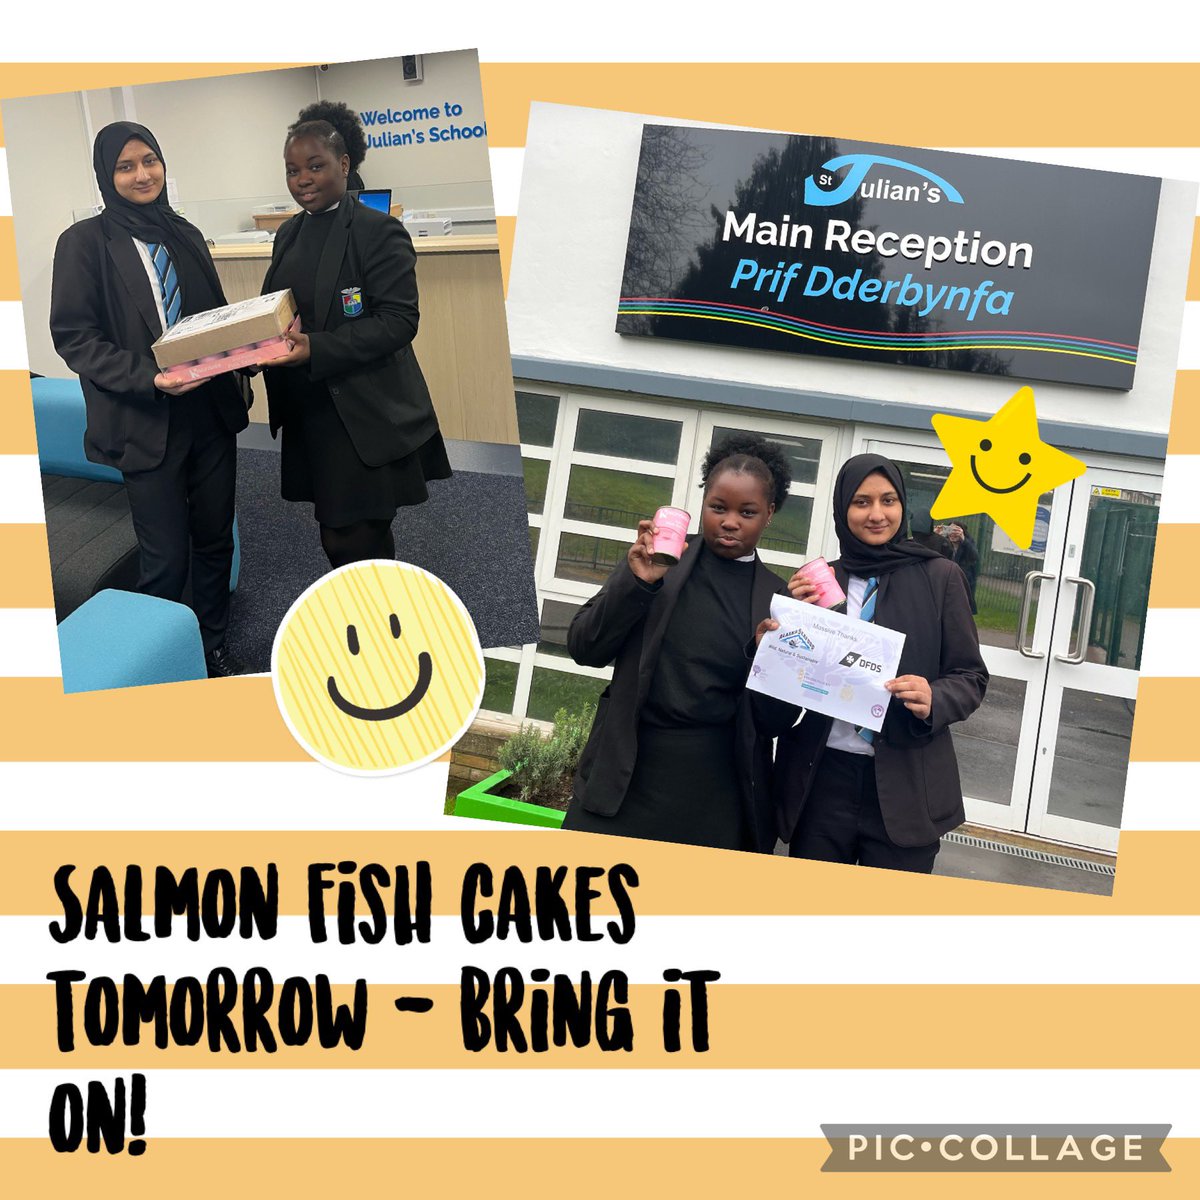 Look what we’ve caught – delicious canned Alaska pink salmon! Tomorrow our students will be learning how to prepare & cook the canned salmon into amazing fishcakes, learning new skills. Thanks to @AlaskaSeafoodUK @dfdsgroup @FoodTCentre @FishmongersCo @StJuliansSchool